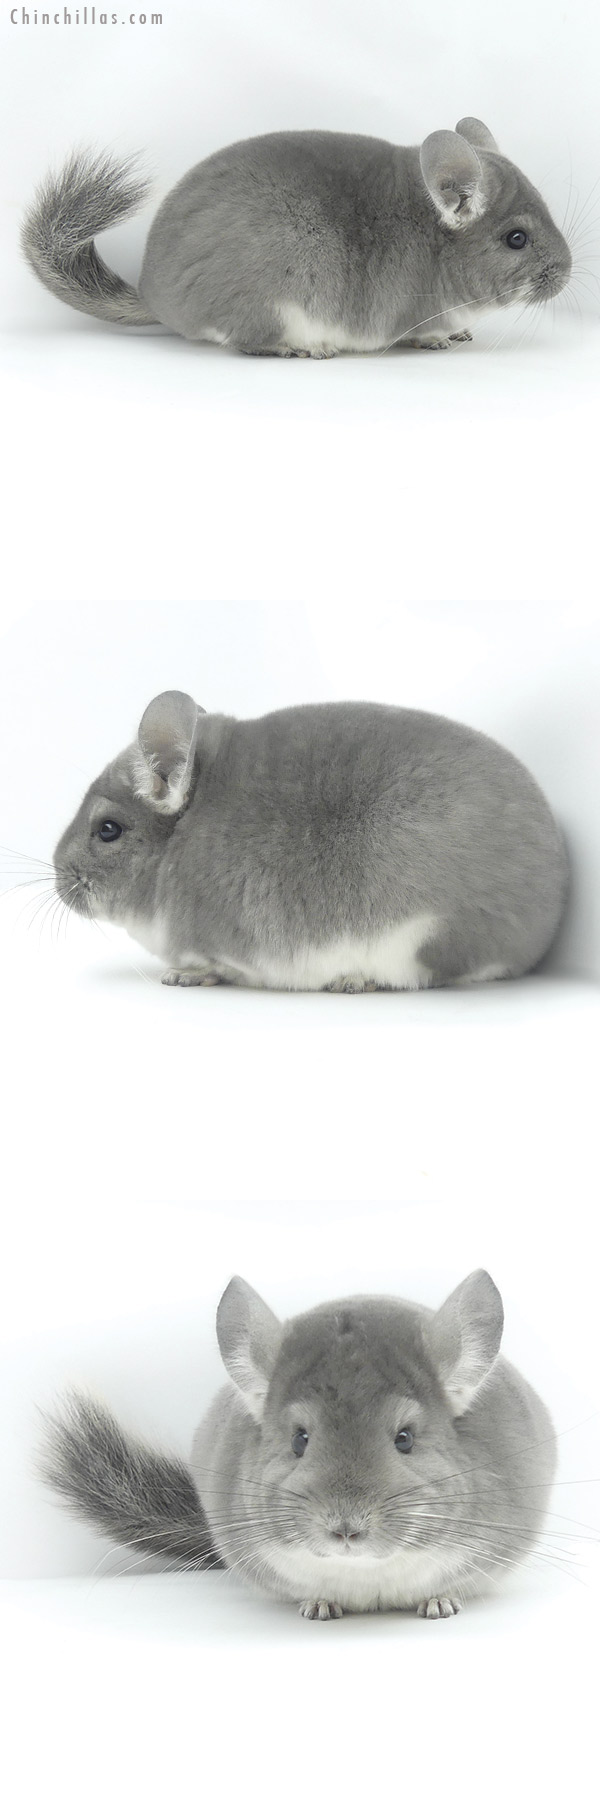 Chinchilla or related item offered for sale or export on Chinchillas.com - 20042 Blocky Premium Production Quality Violet Female Chinchilla